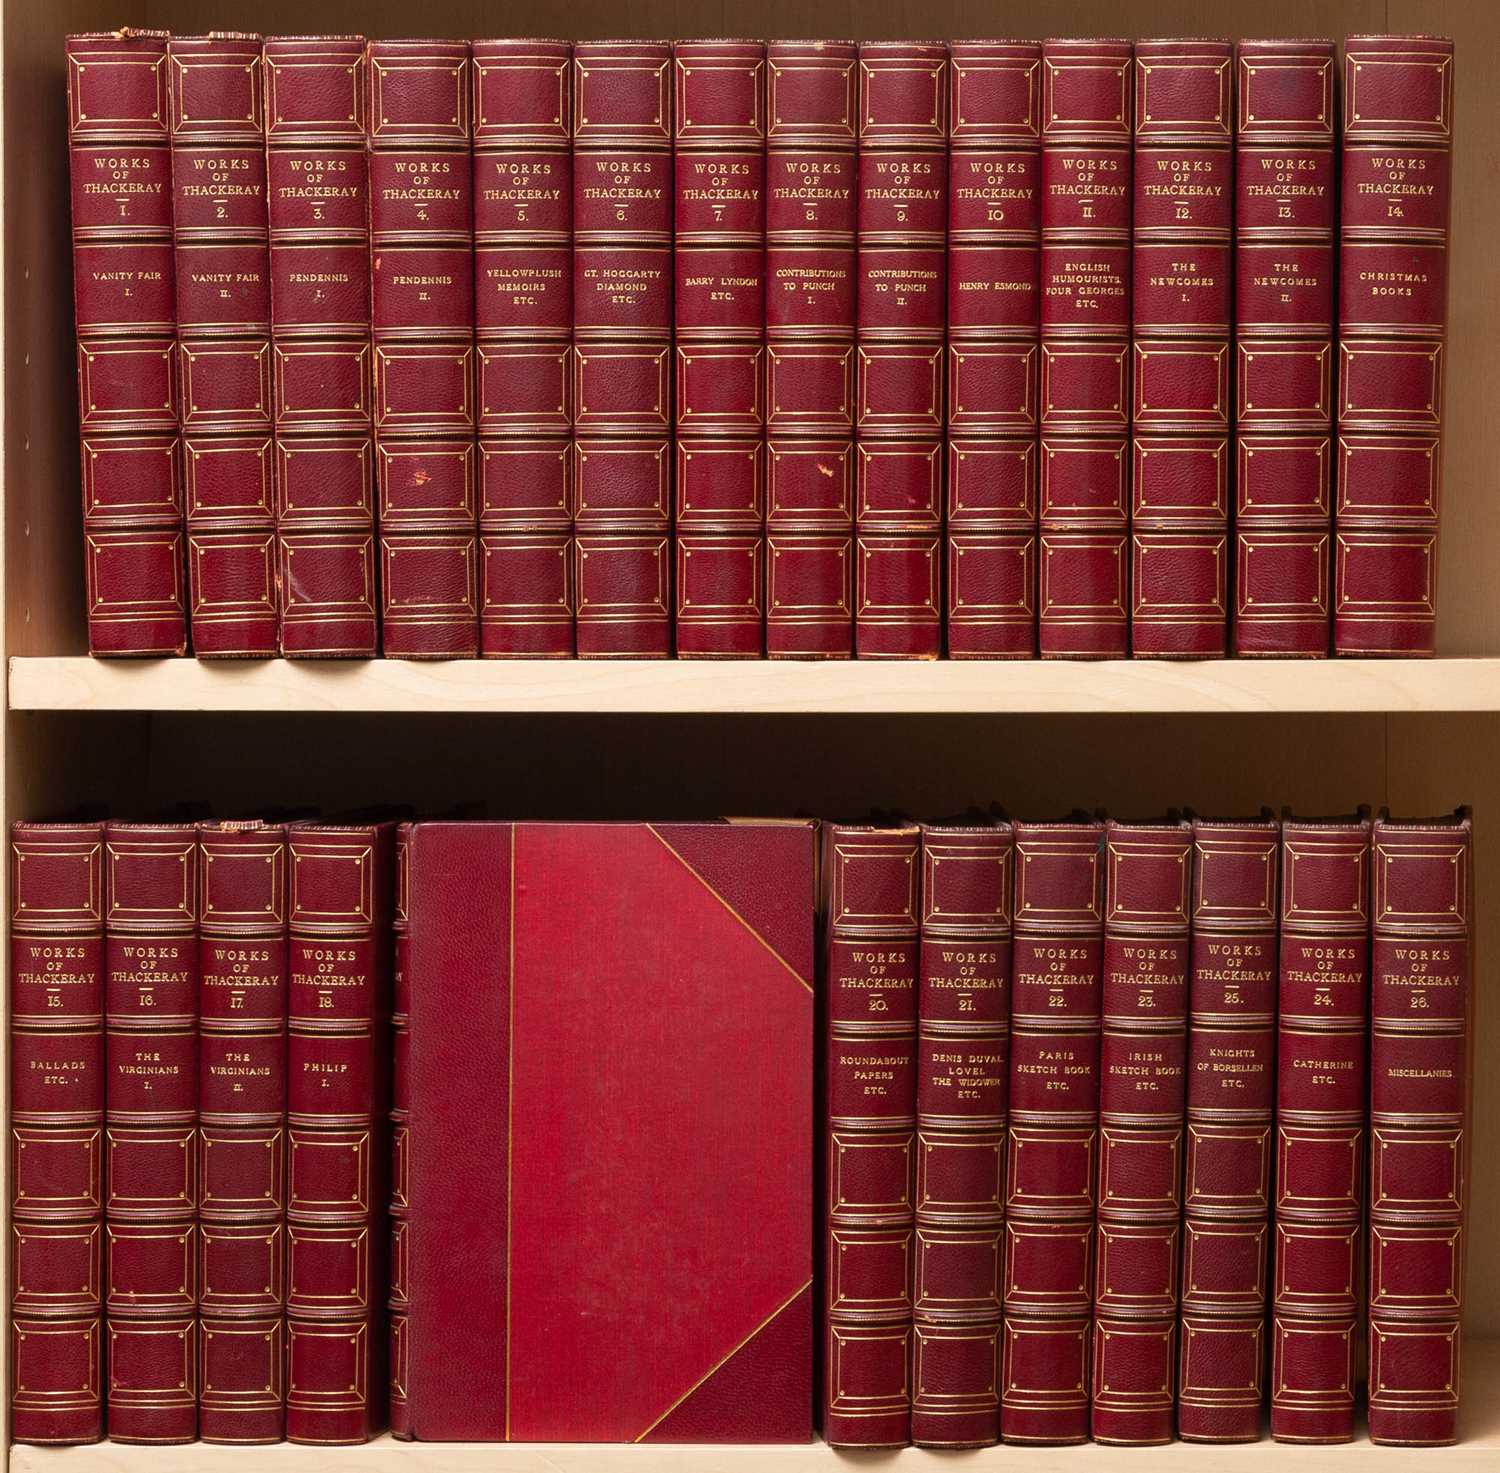 Lot 53 - An attractively bound set of Thackeray's works